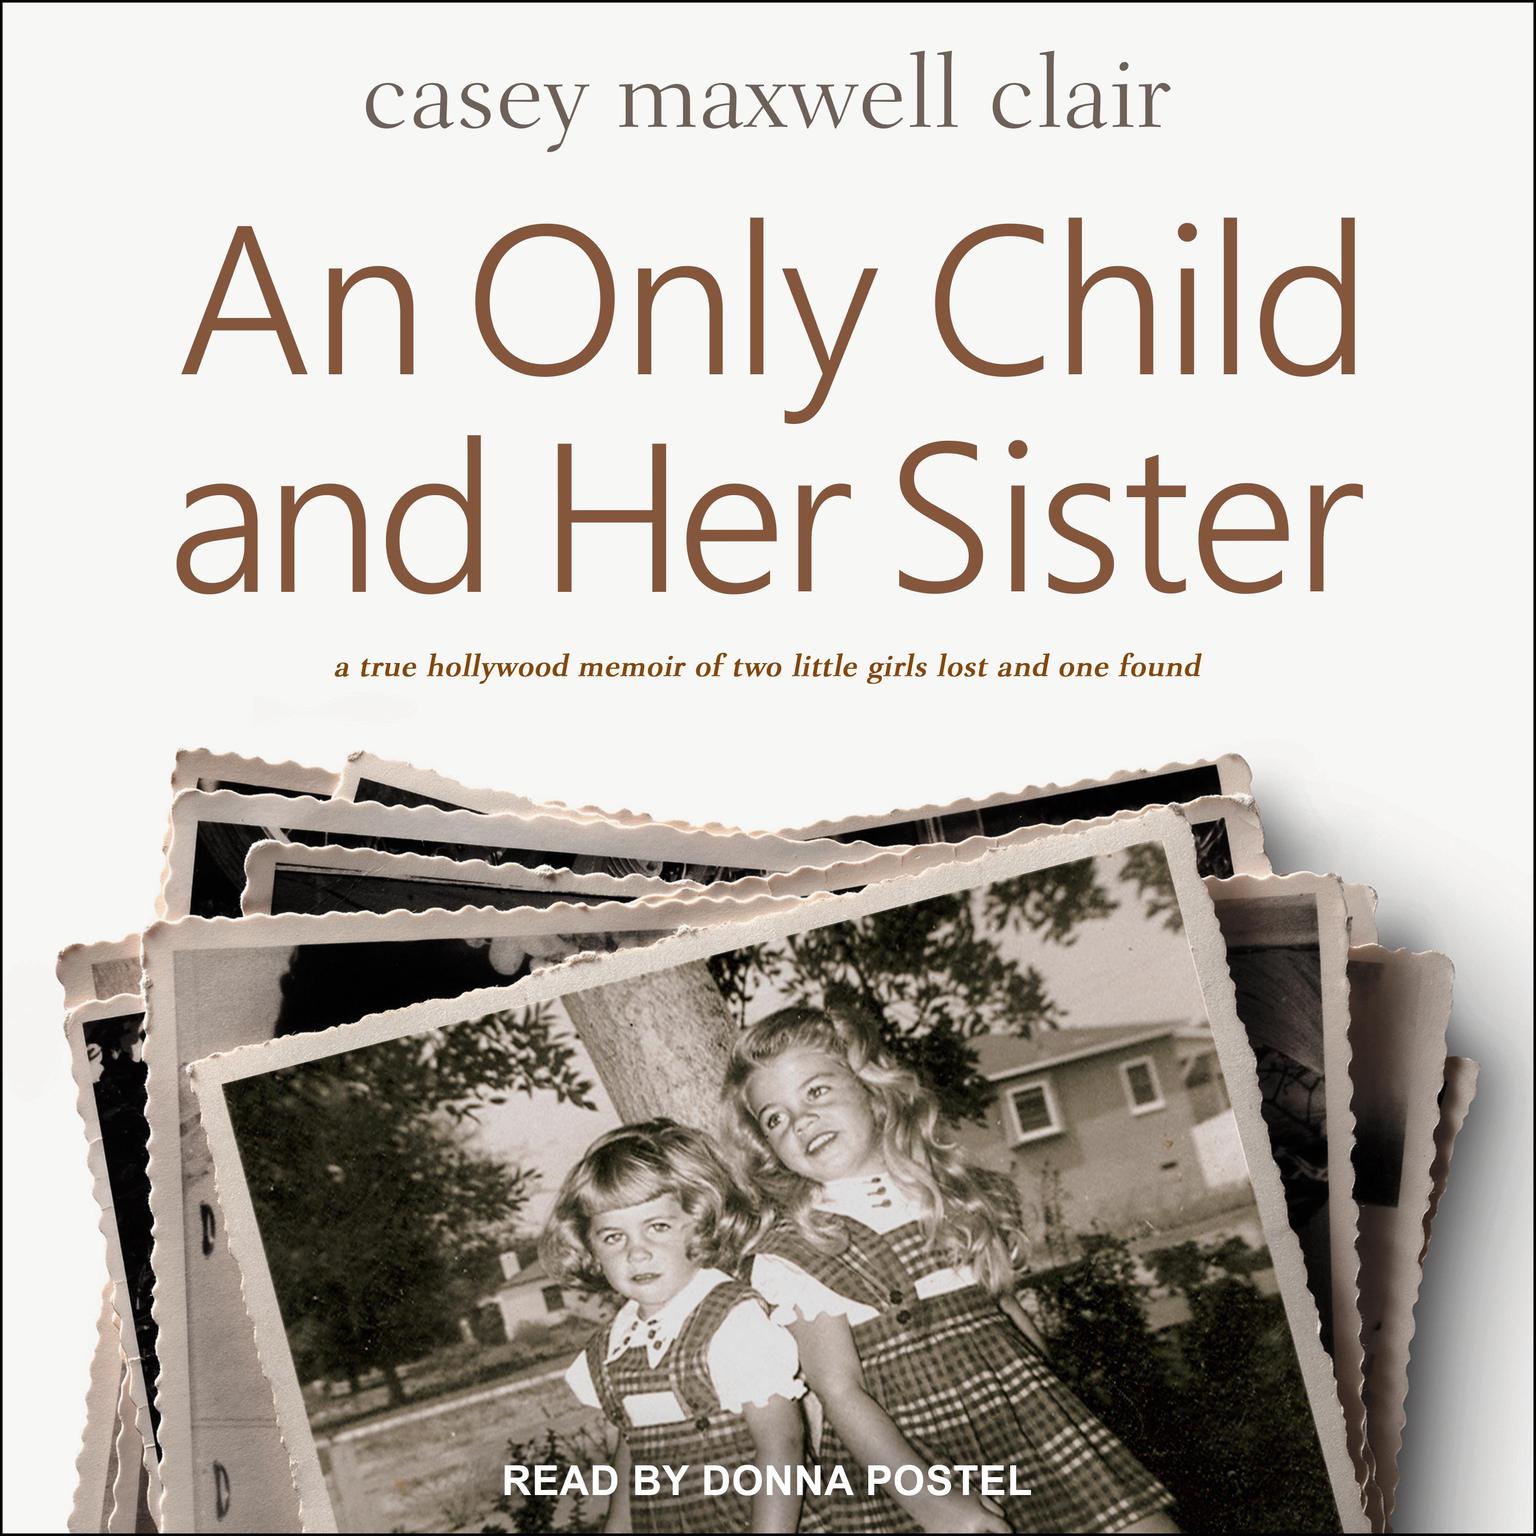 An Only Child and Her Sister: A Memoir Audiobook, by Casey Maxwell Clair